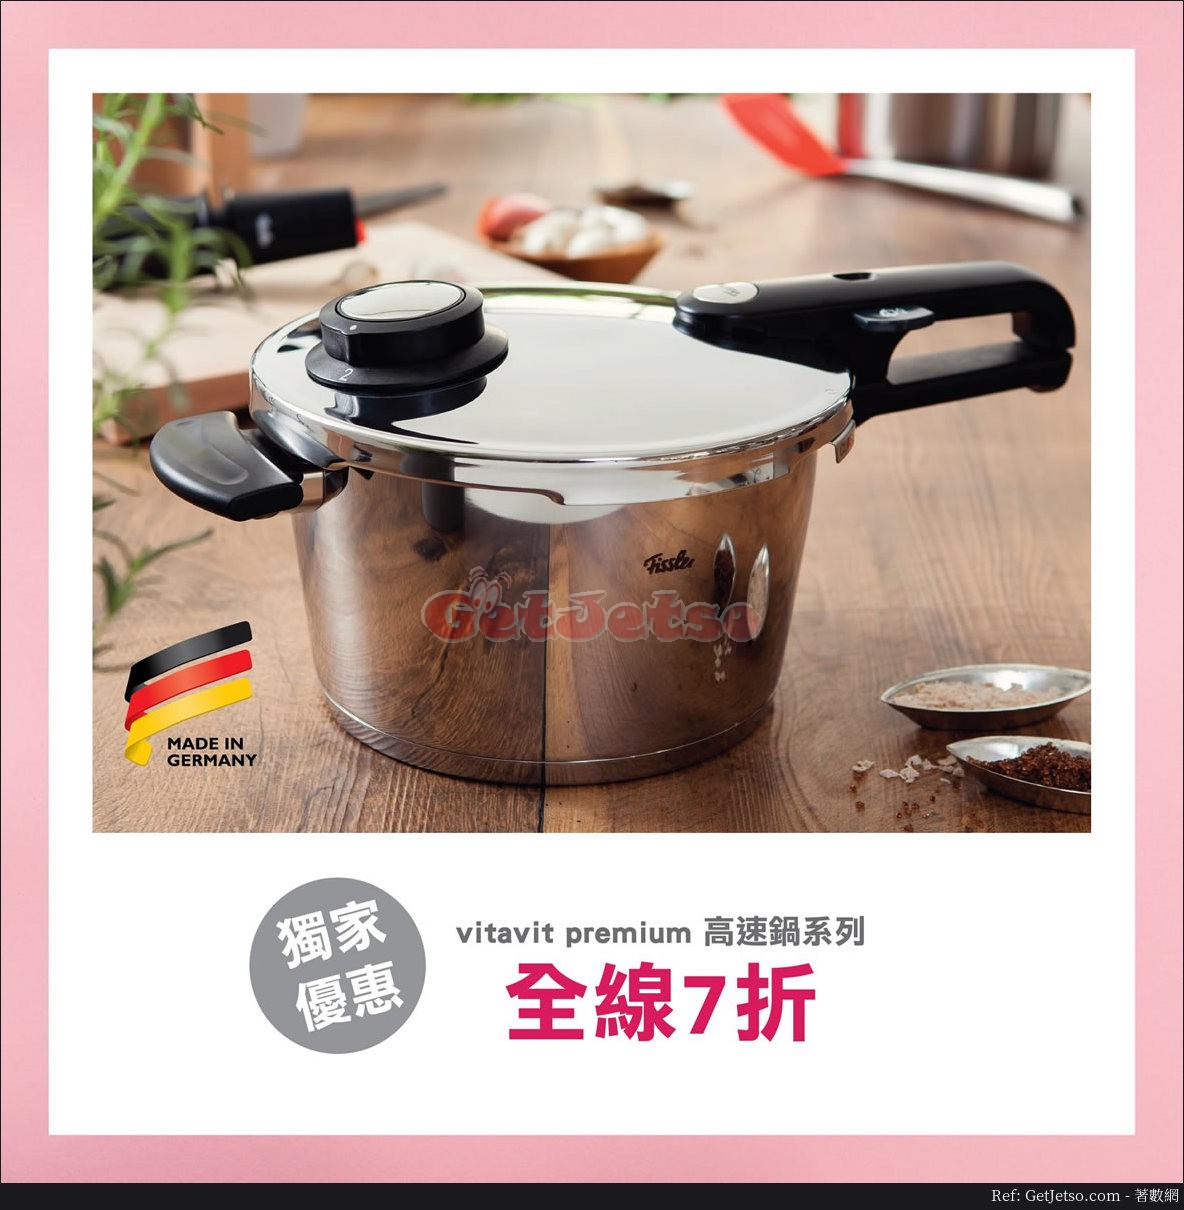 Fissler x Cook town 低至3折Private sale 優惠(18年2月1-3日)圖片6